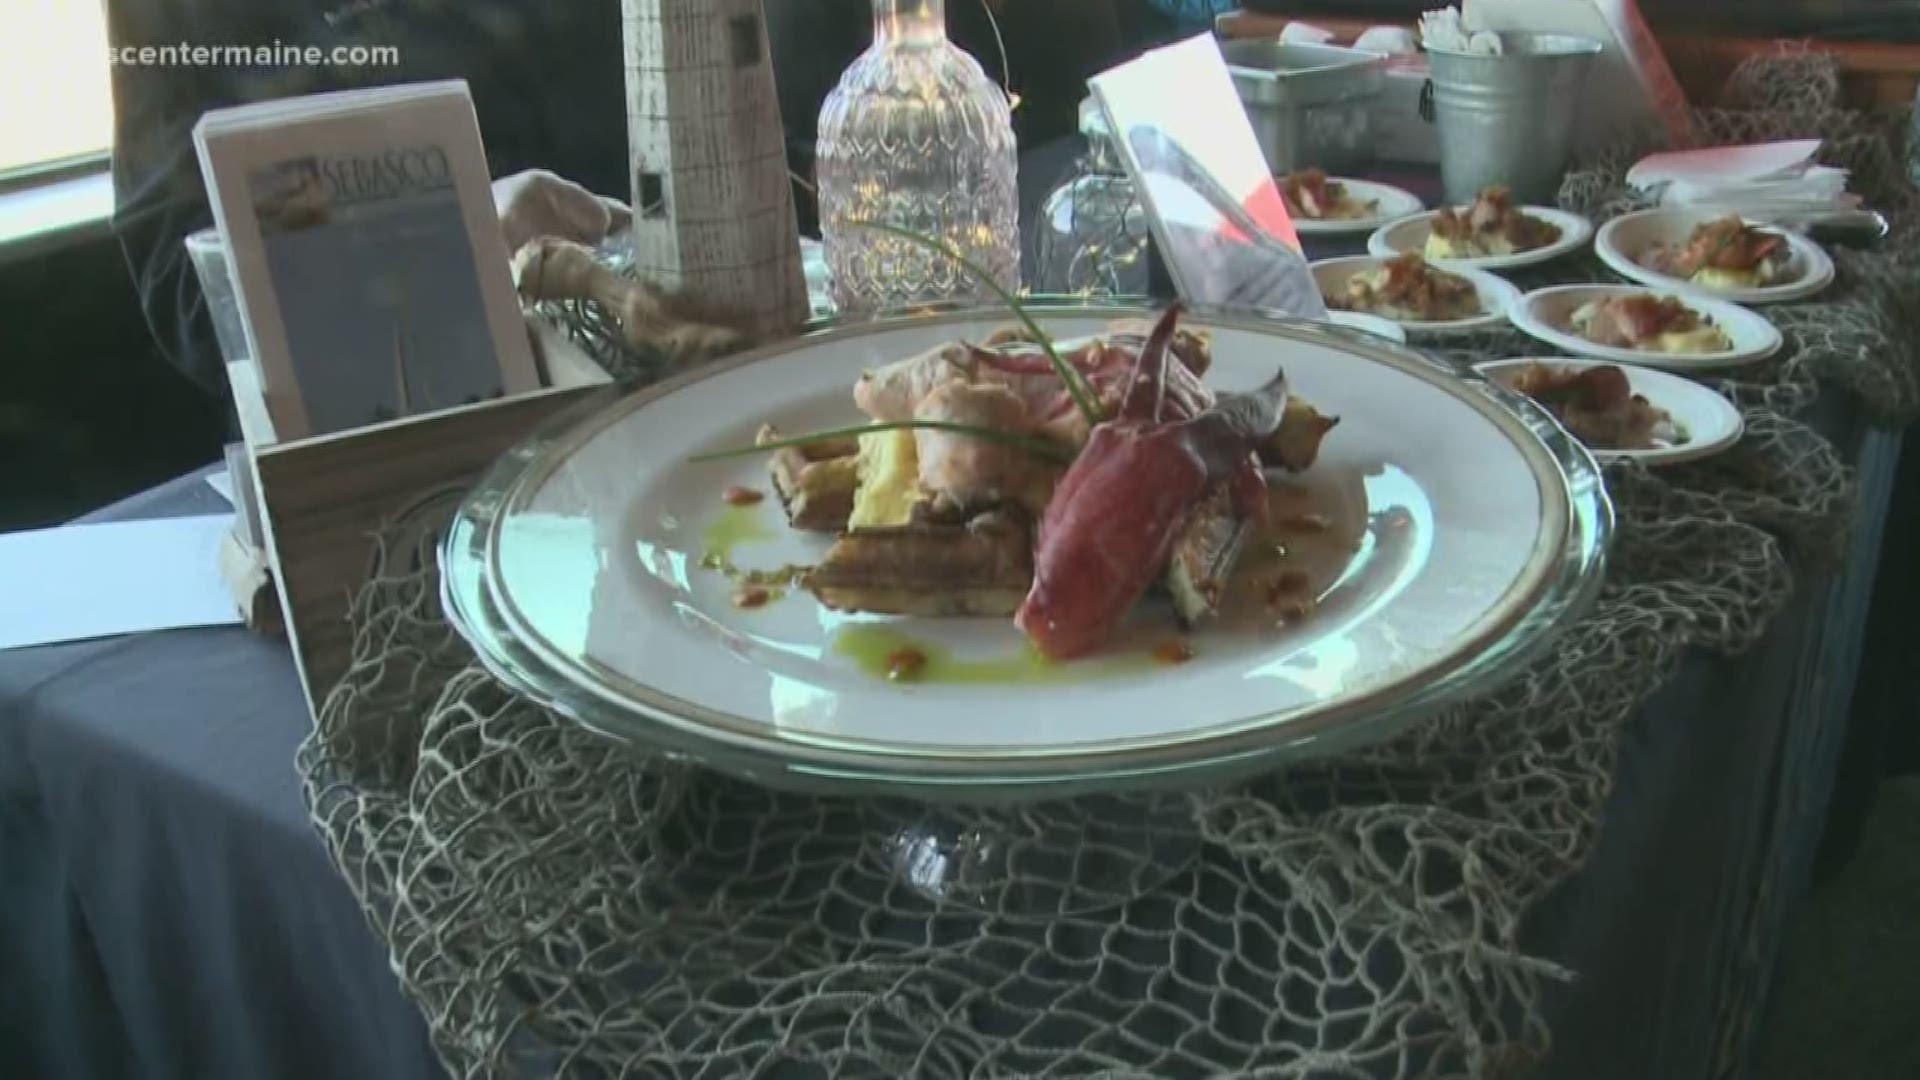 Maine Restaurant Week kicks off with the Incredible Breakfast Cook-Off